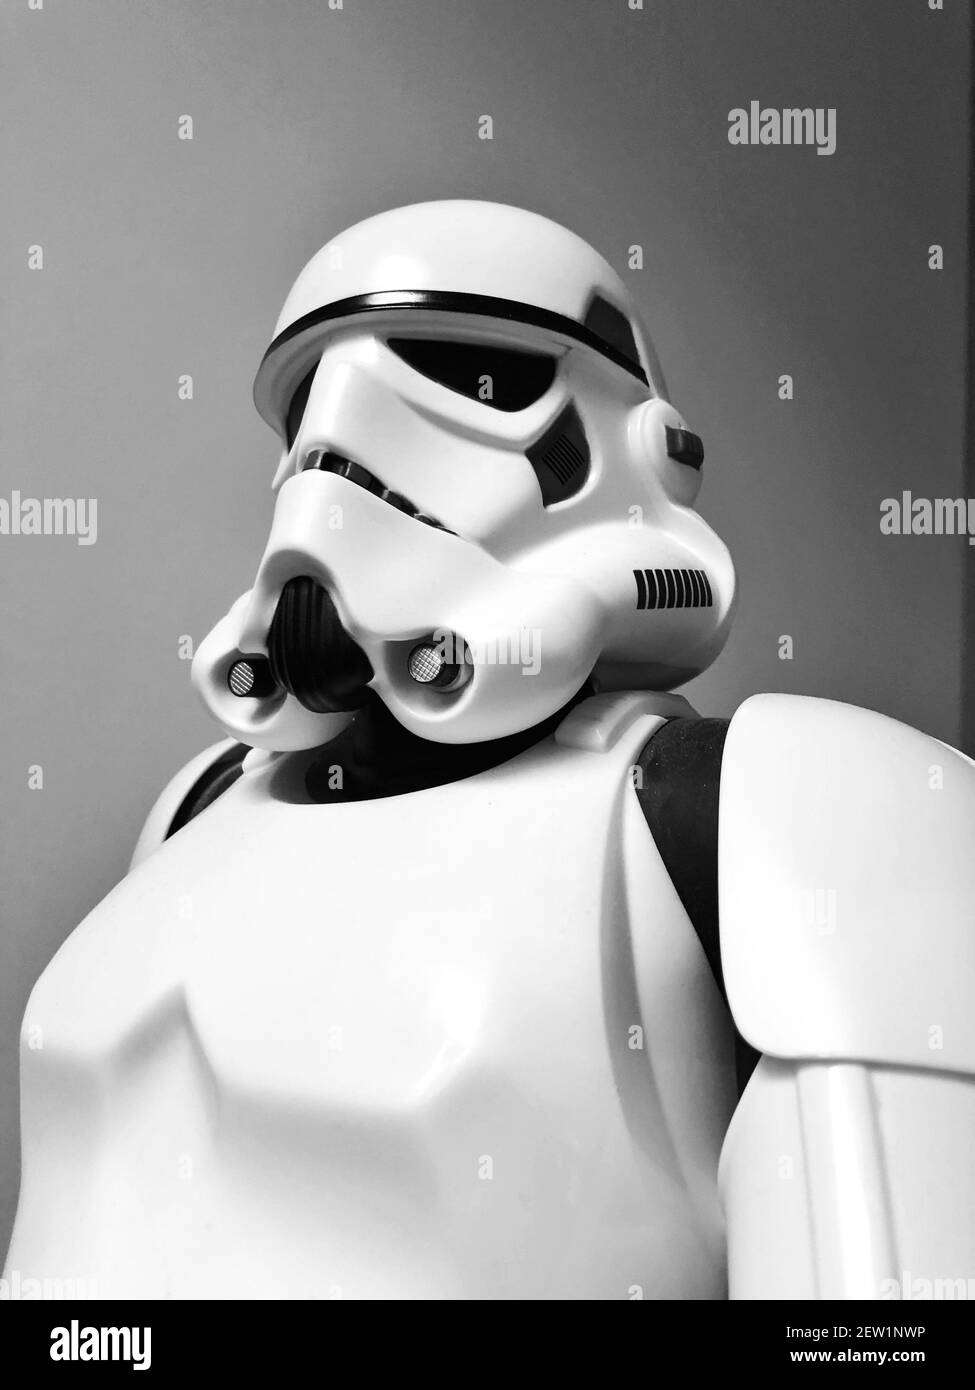 Low angle view of a Star Wars Stormtrooper looking menacing and threatening Stock Photo